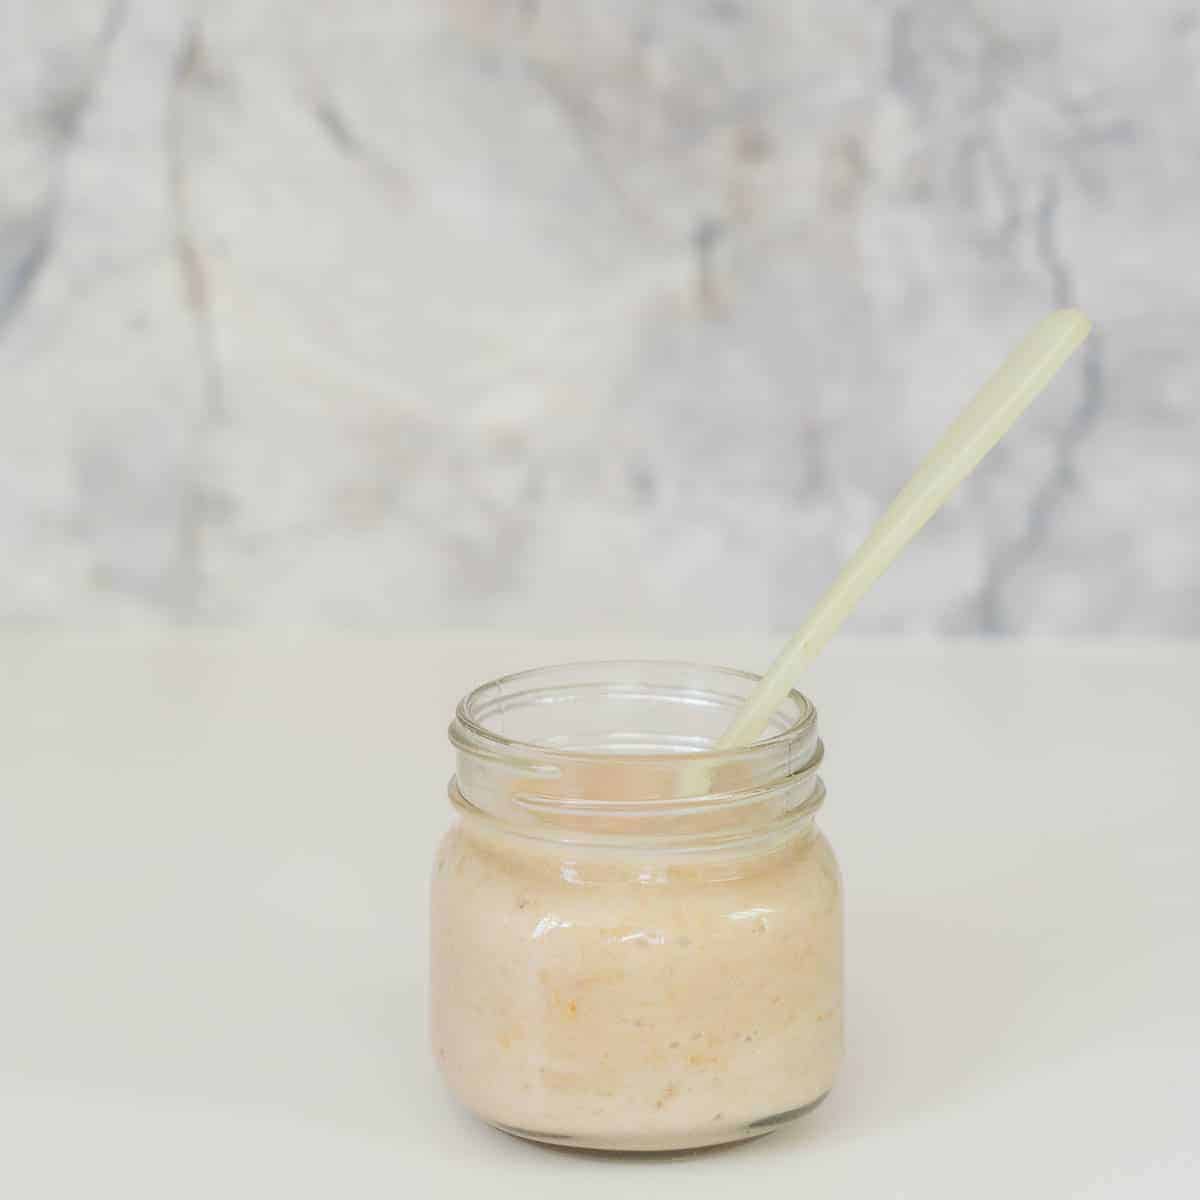 A jar of creamy coloured puree with a spoon in tit